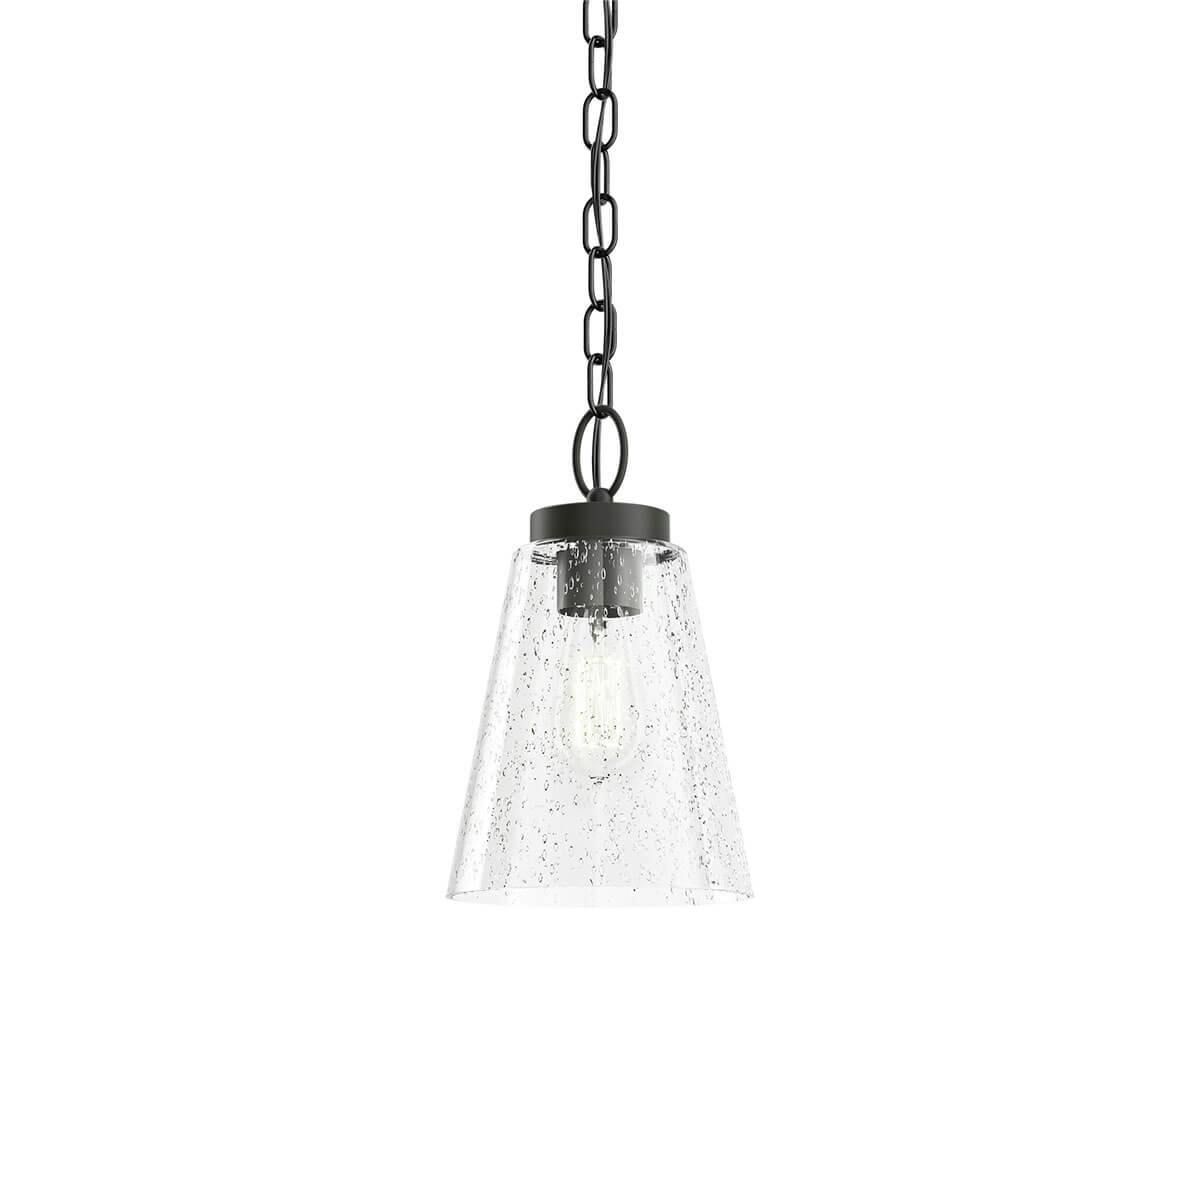 Roycroft 7" 1 Light Pendant Black without the canopy on a white background